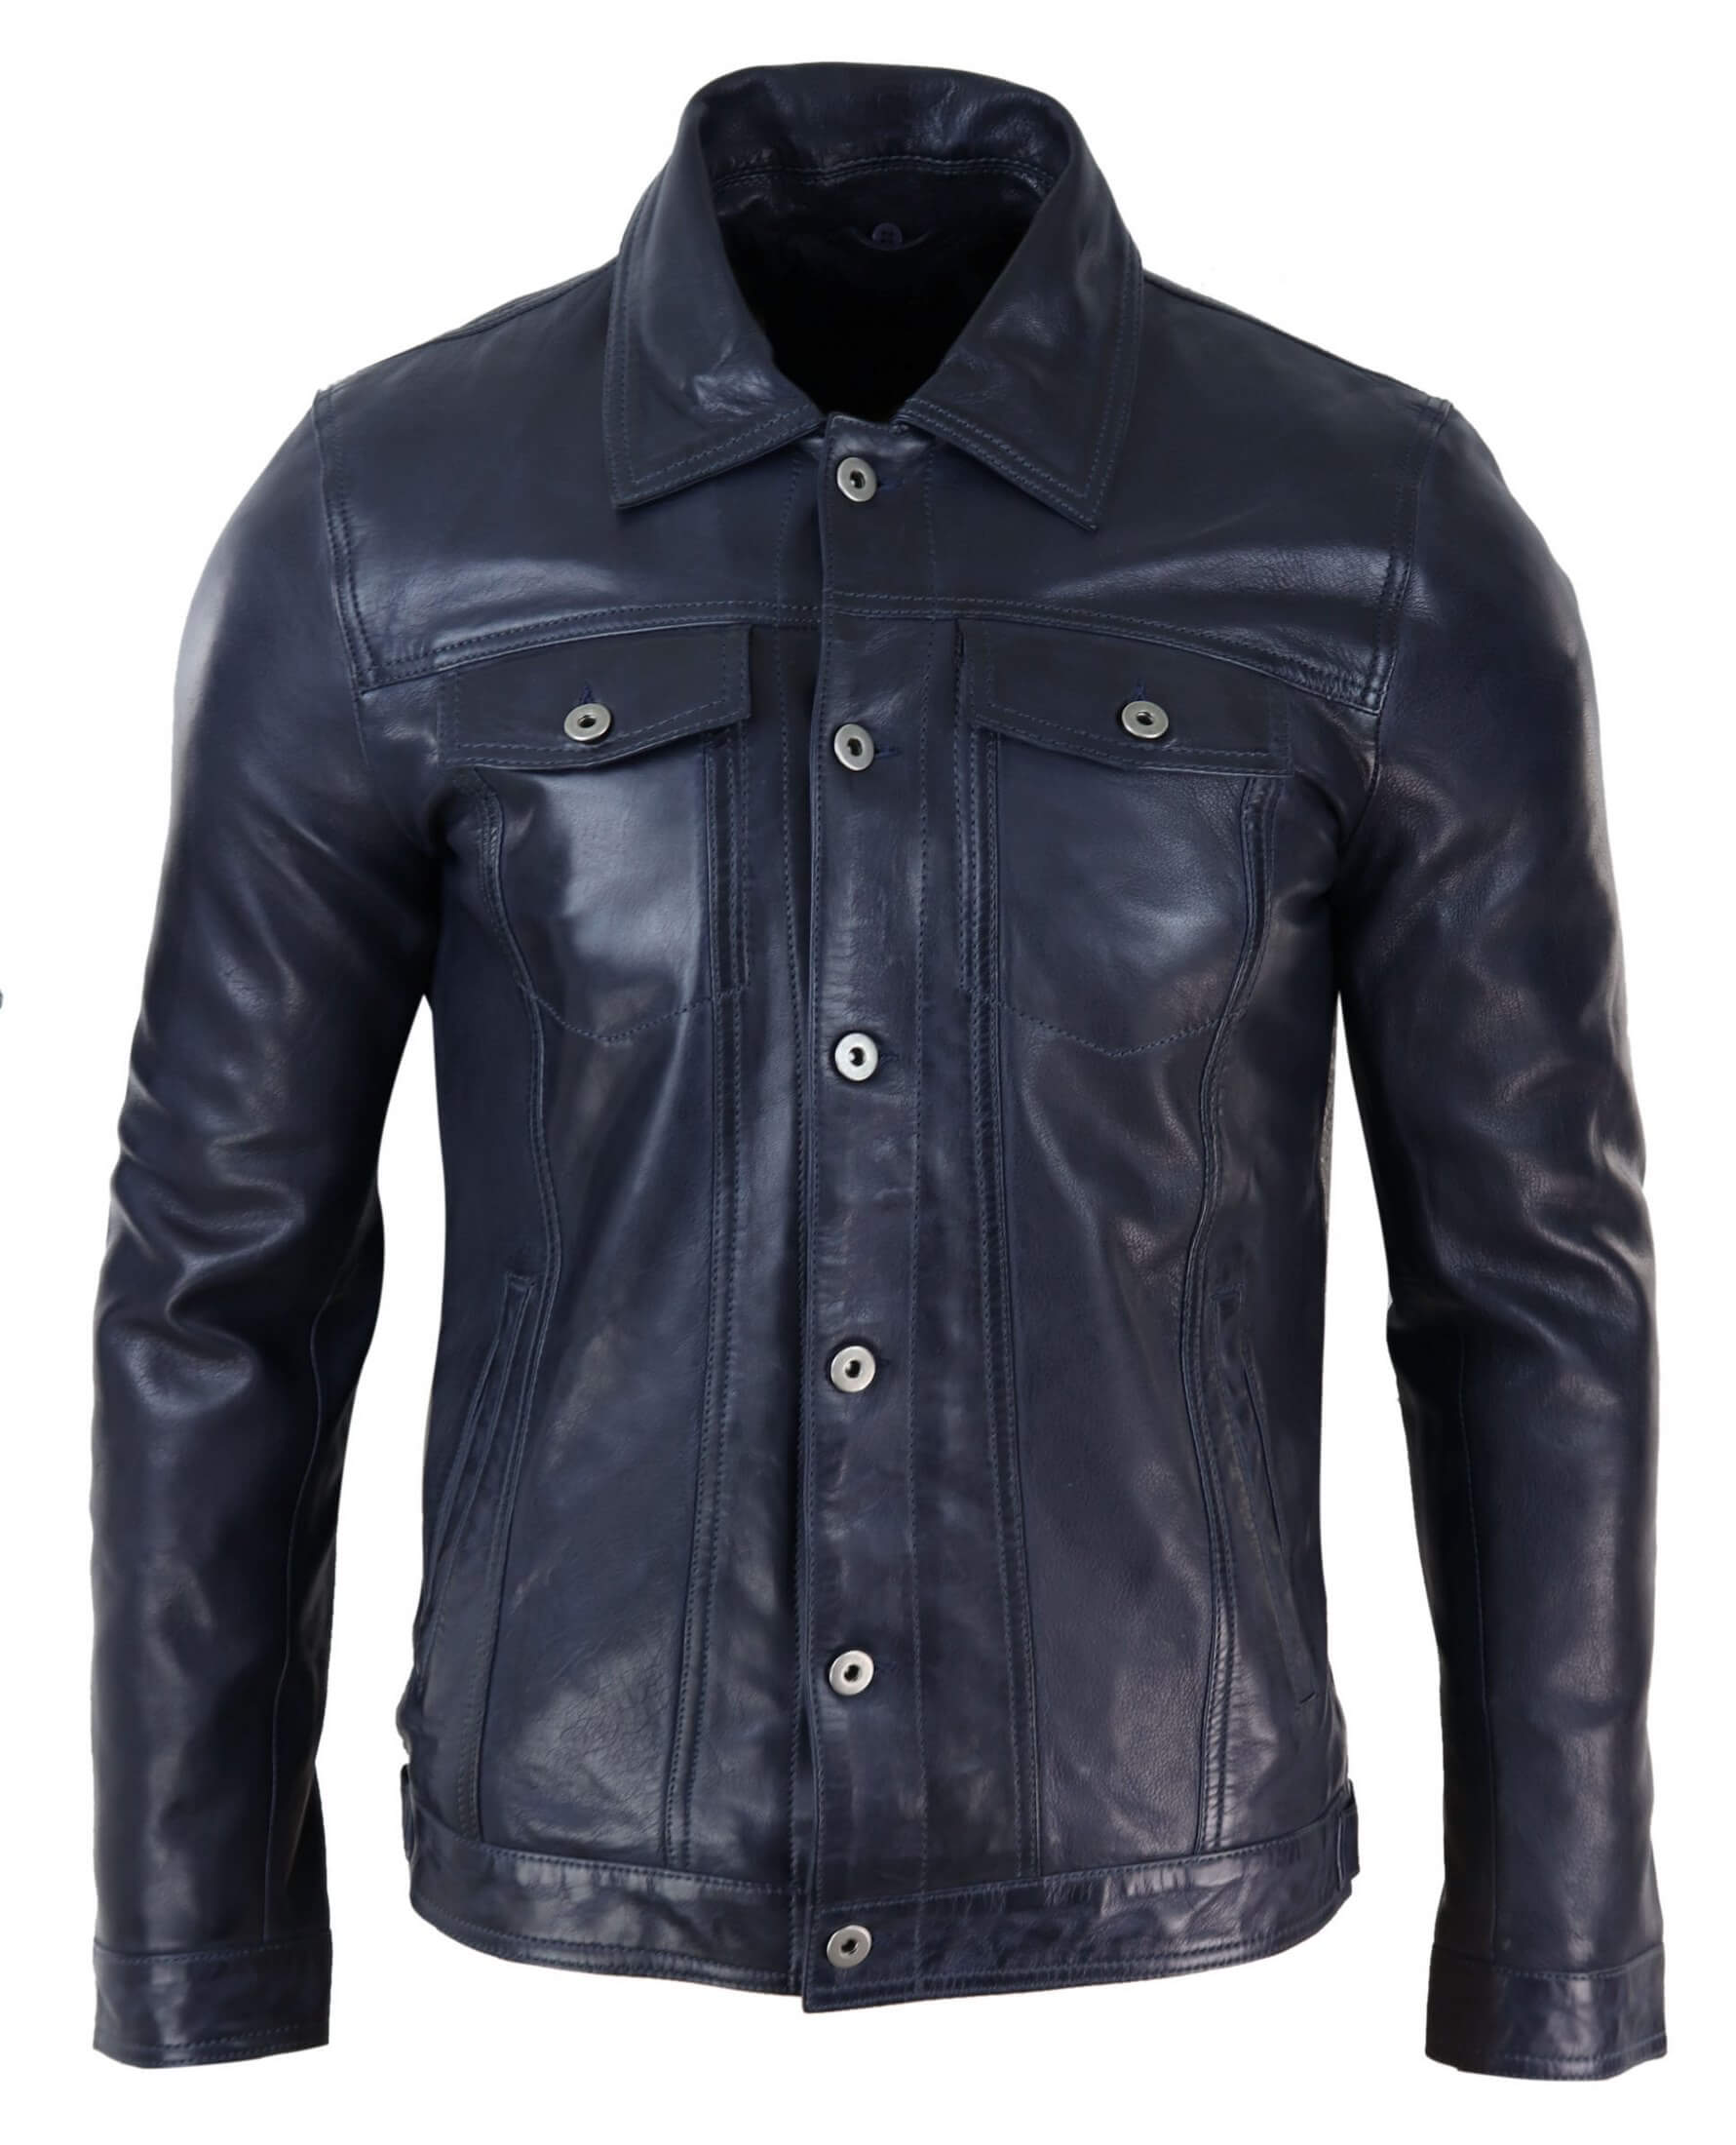 Kevin Hart Leather Jacket #1 : Made To Measure Custom Jeans For Men &  Women, MakeYourOwnJeans®